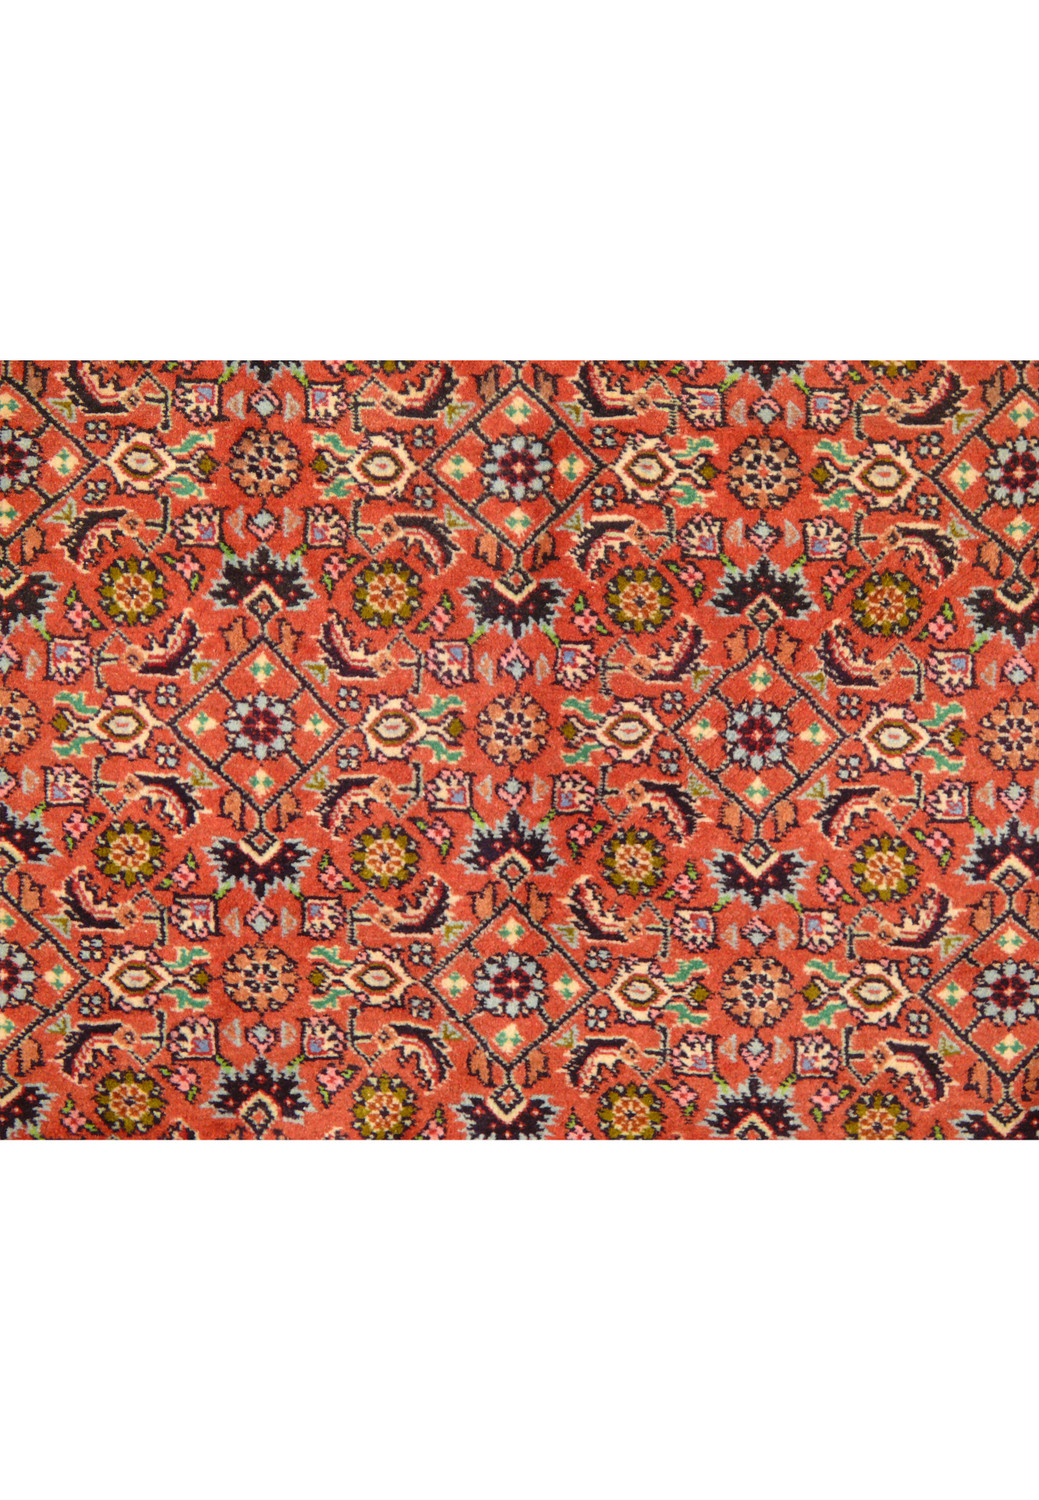 Angle view of the Persian Bijar Rug, revealing the texture and thickness of the weave